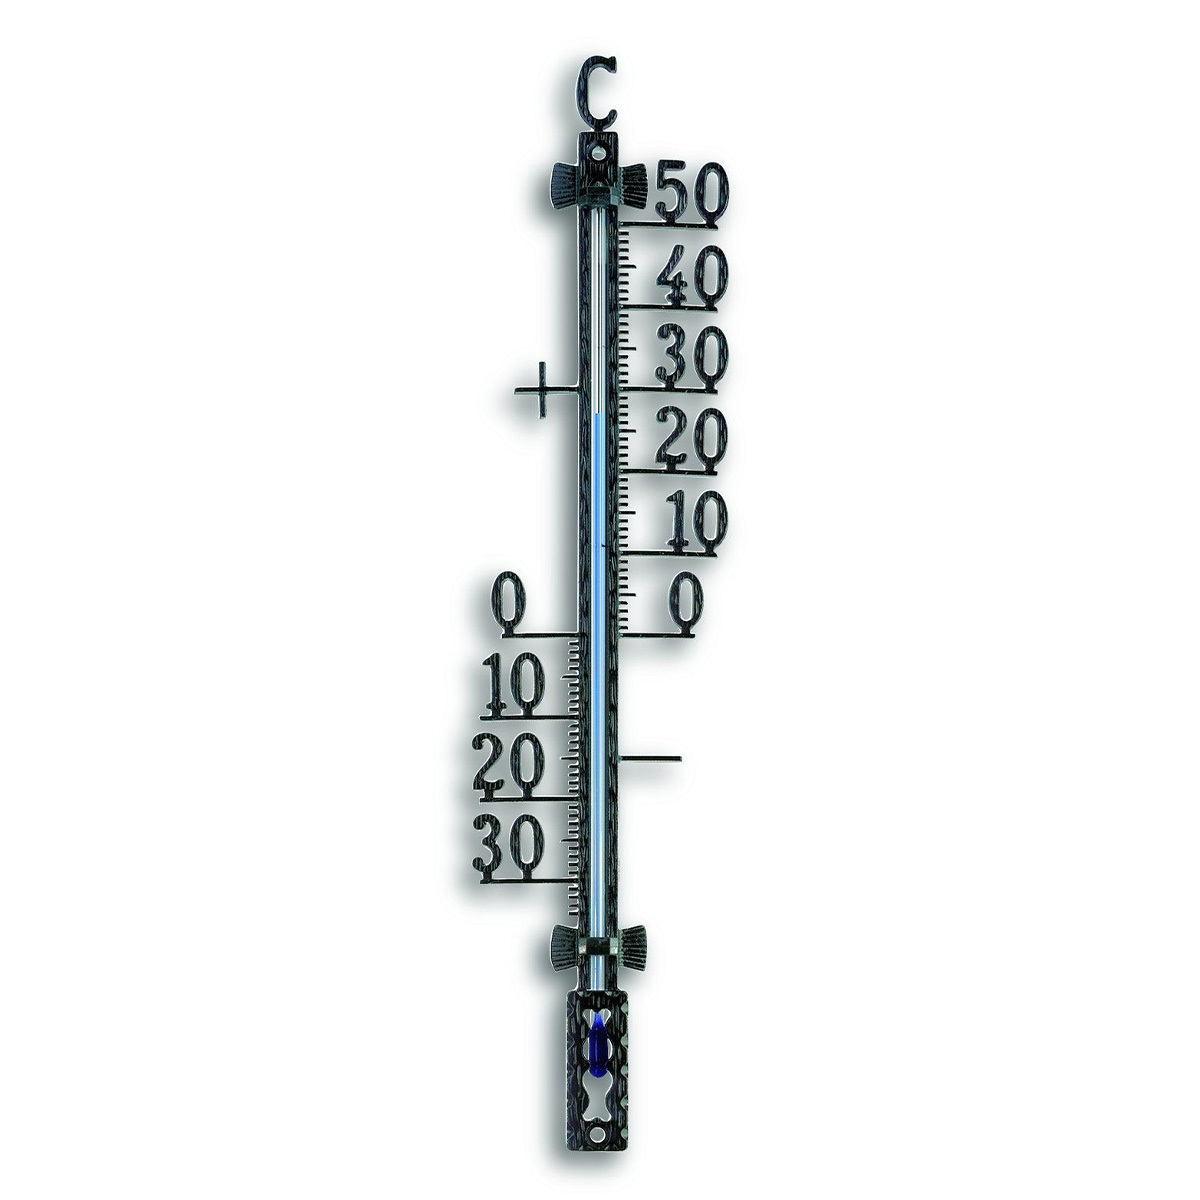 12-5001-01-analoges-aussenthermometer-metall-1200x1200px.jpg